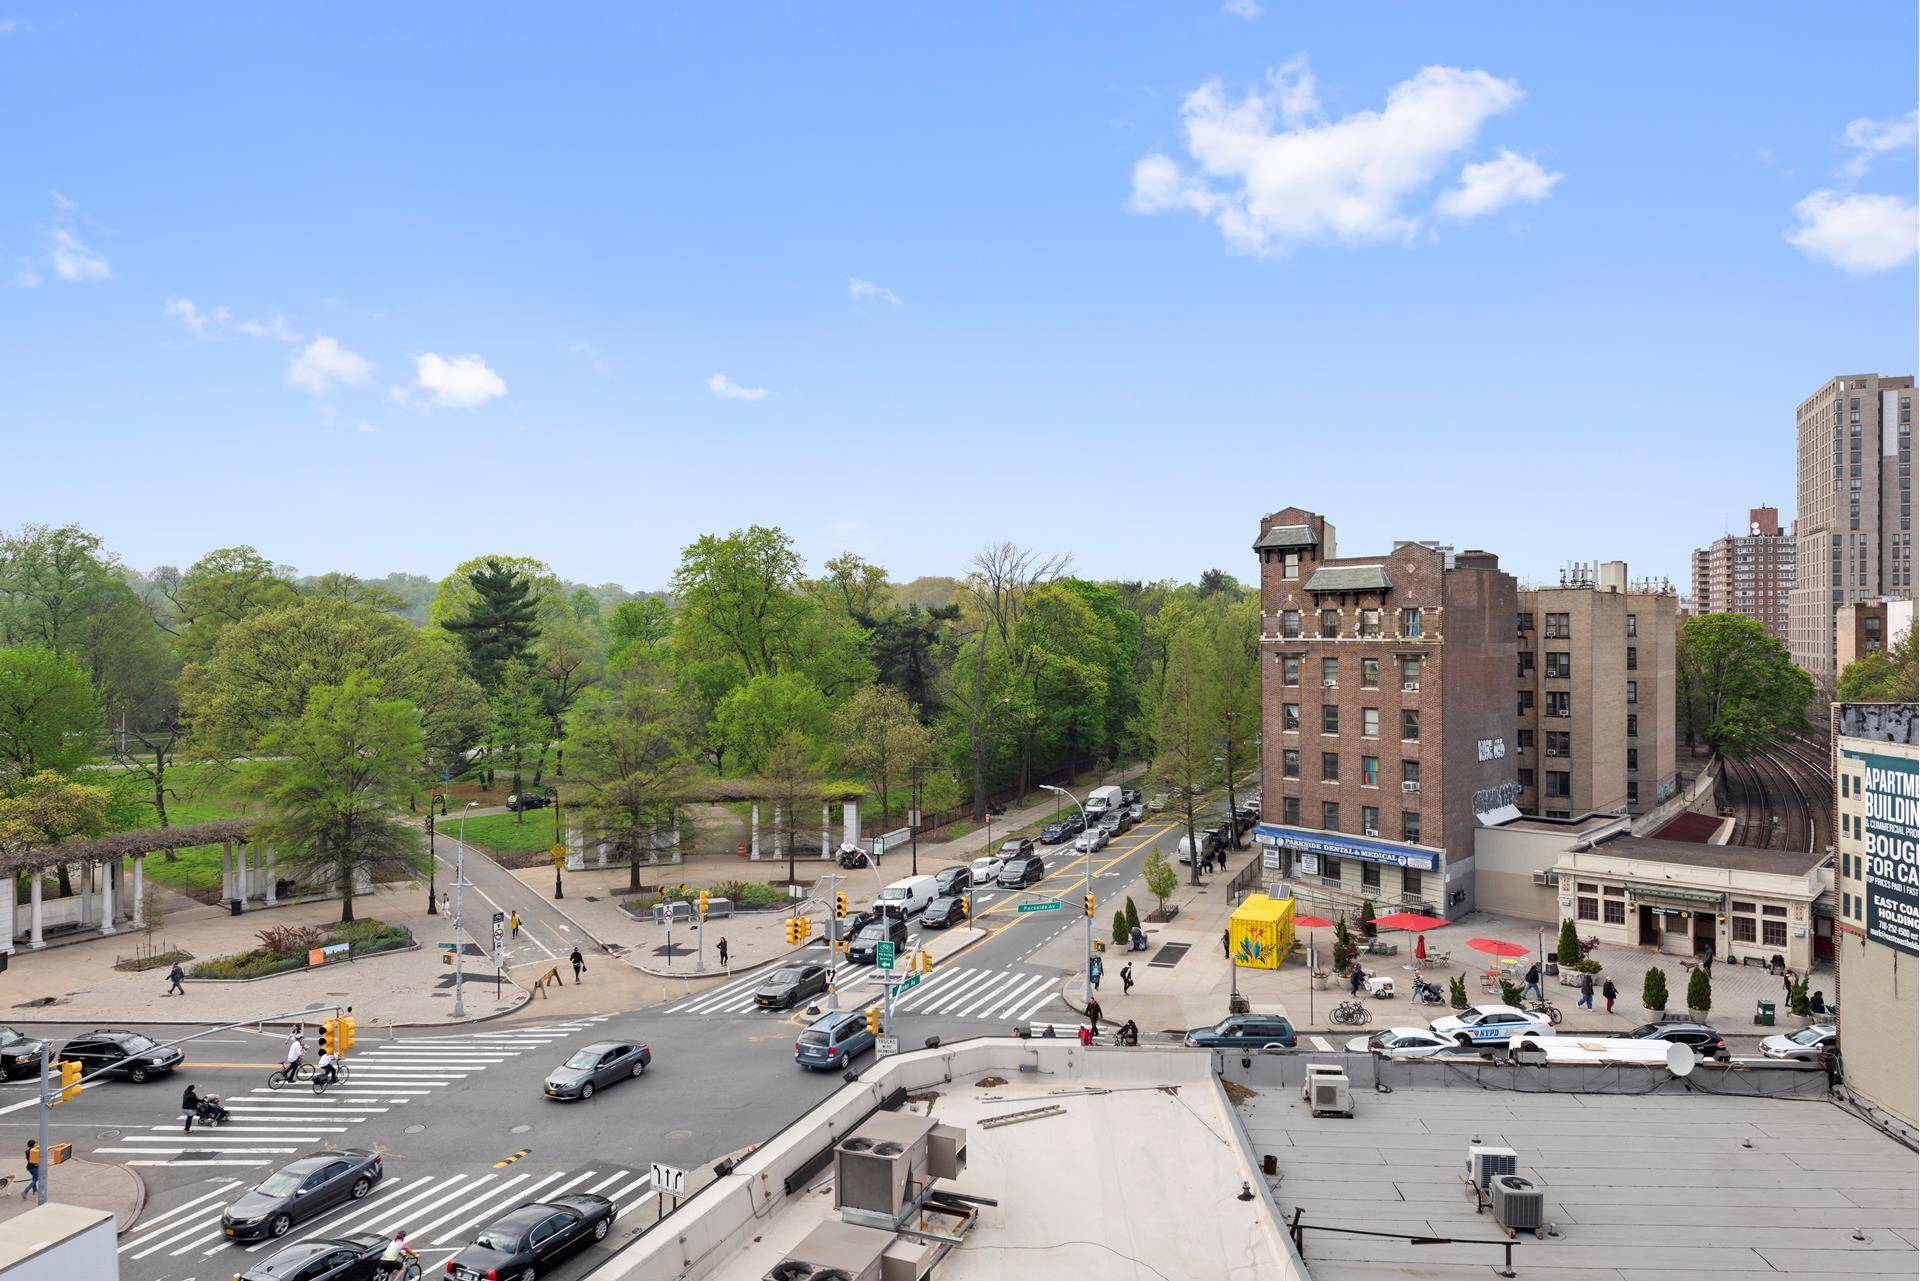 The Prospect Park East Condominiums was built at a time when style and innovation was paramount.